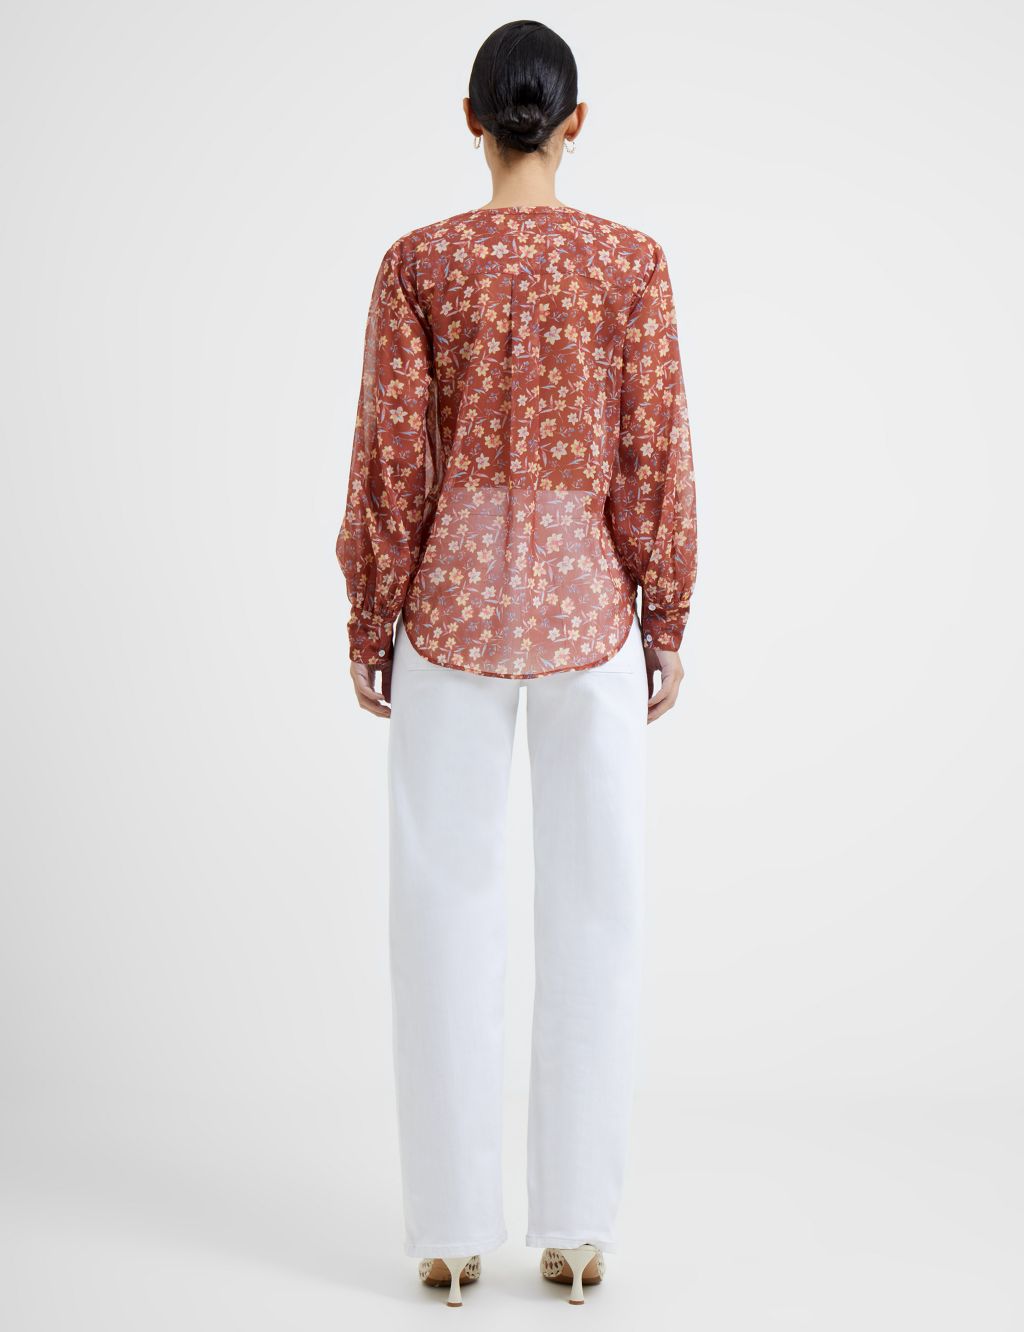 Sheer Floral Relaxed Shirt image 3